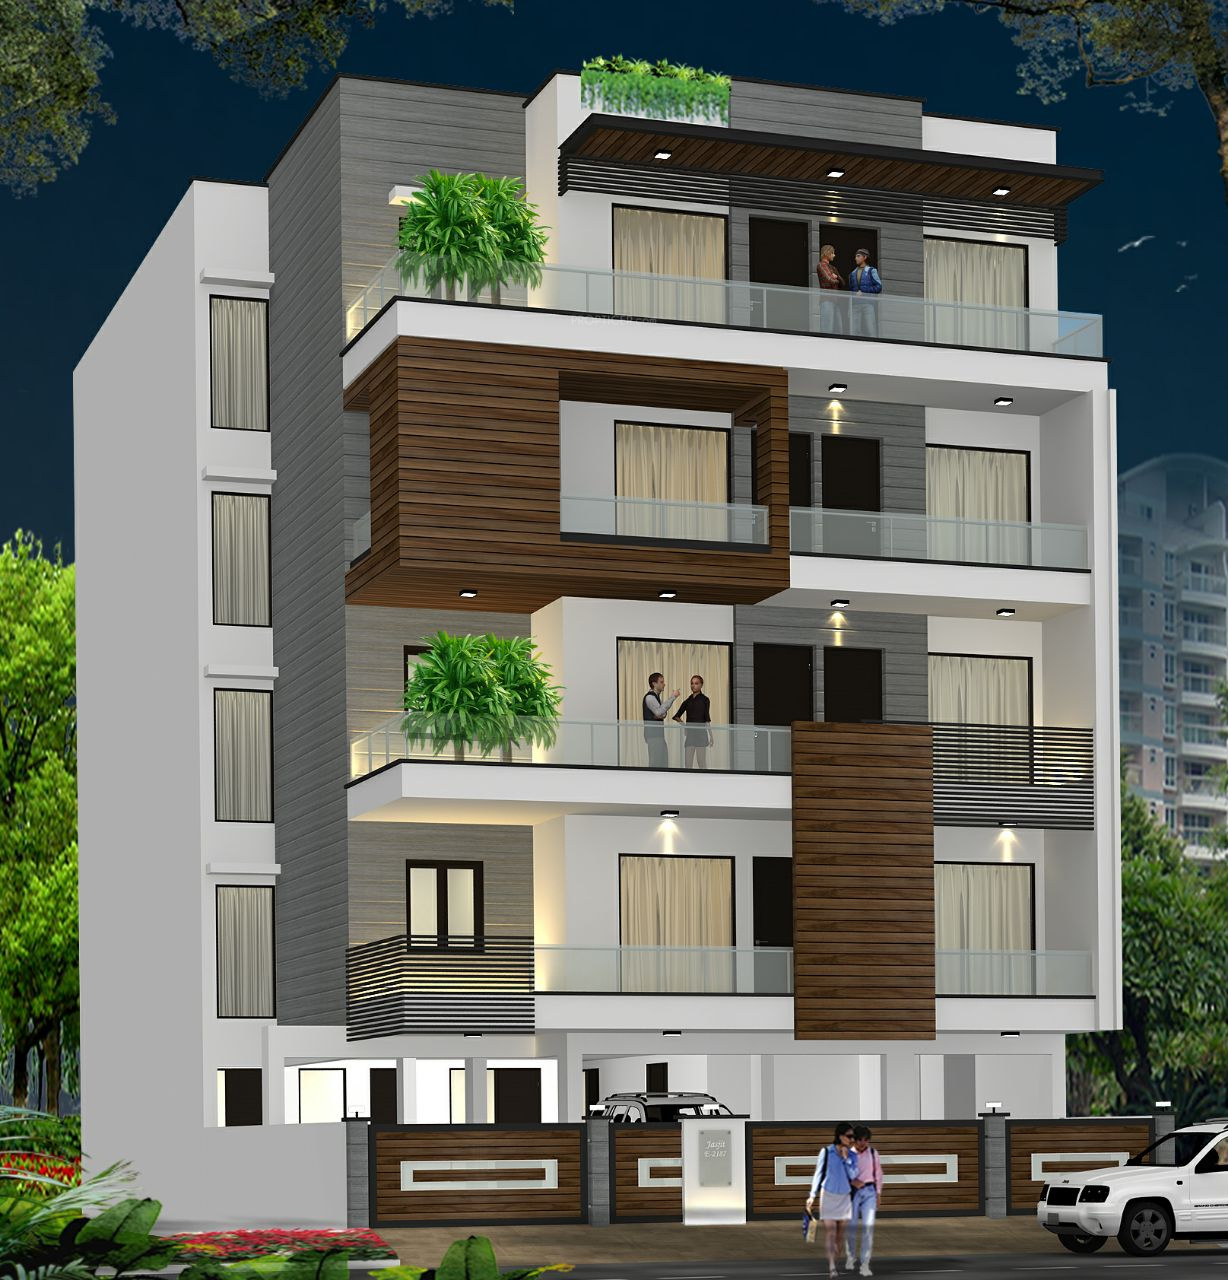 4 BHK Cluster Plan Image - Sukhmani Homes Homes for sale at Palam Vihar ...